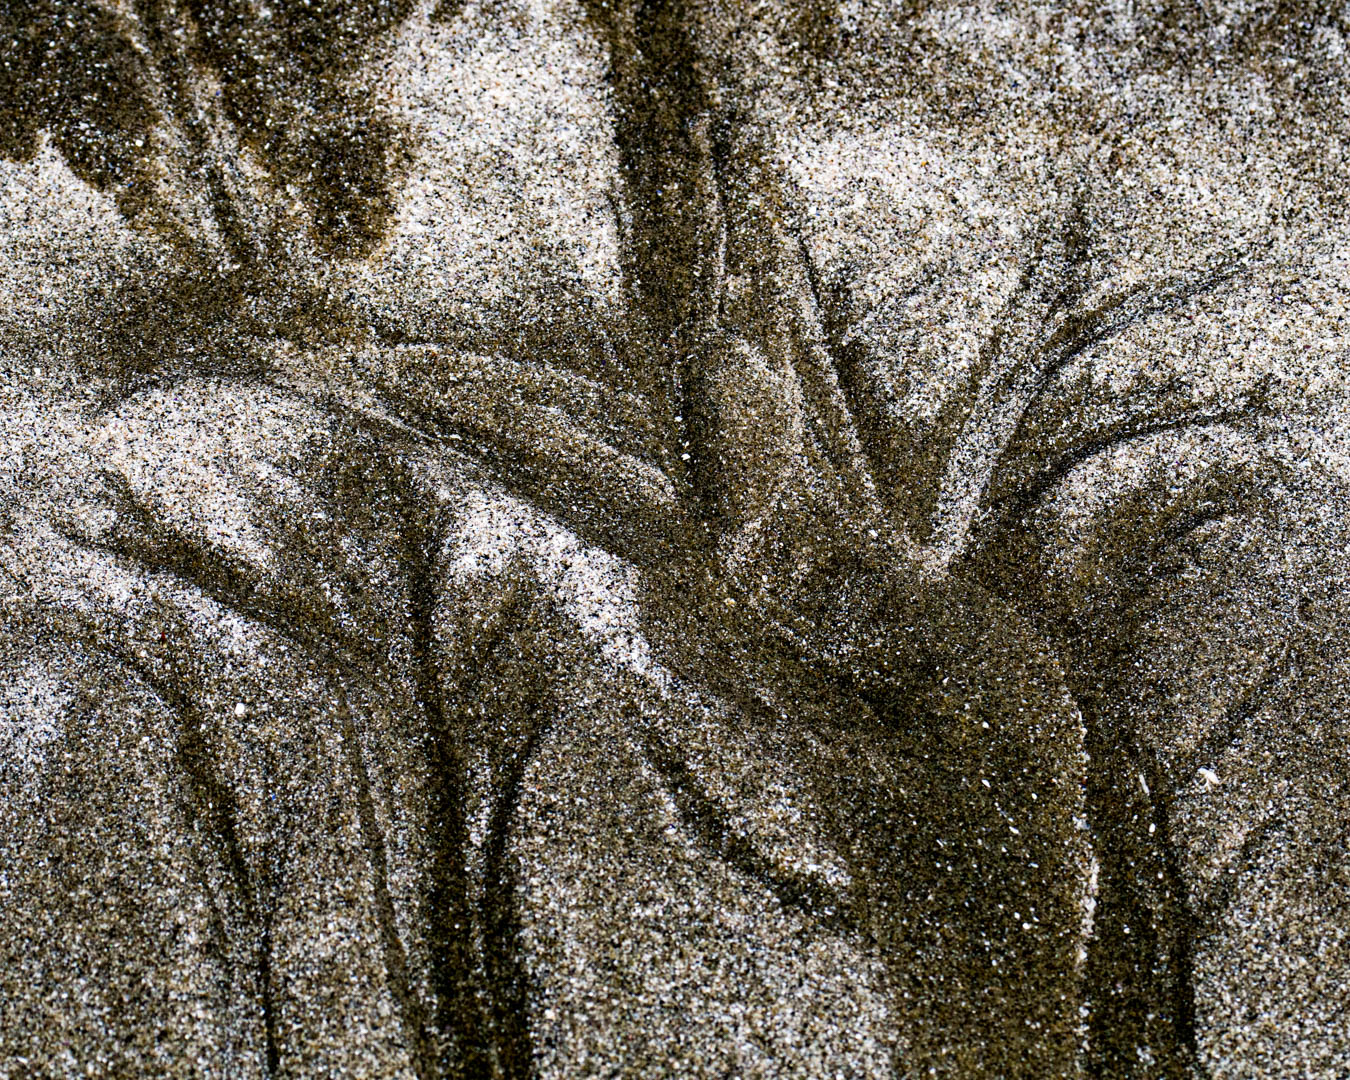 A close up image of sand particles being moved like large rivers eroding the landscape